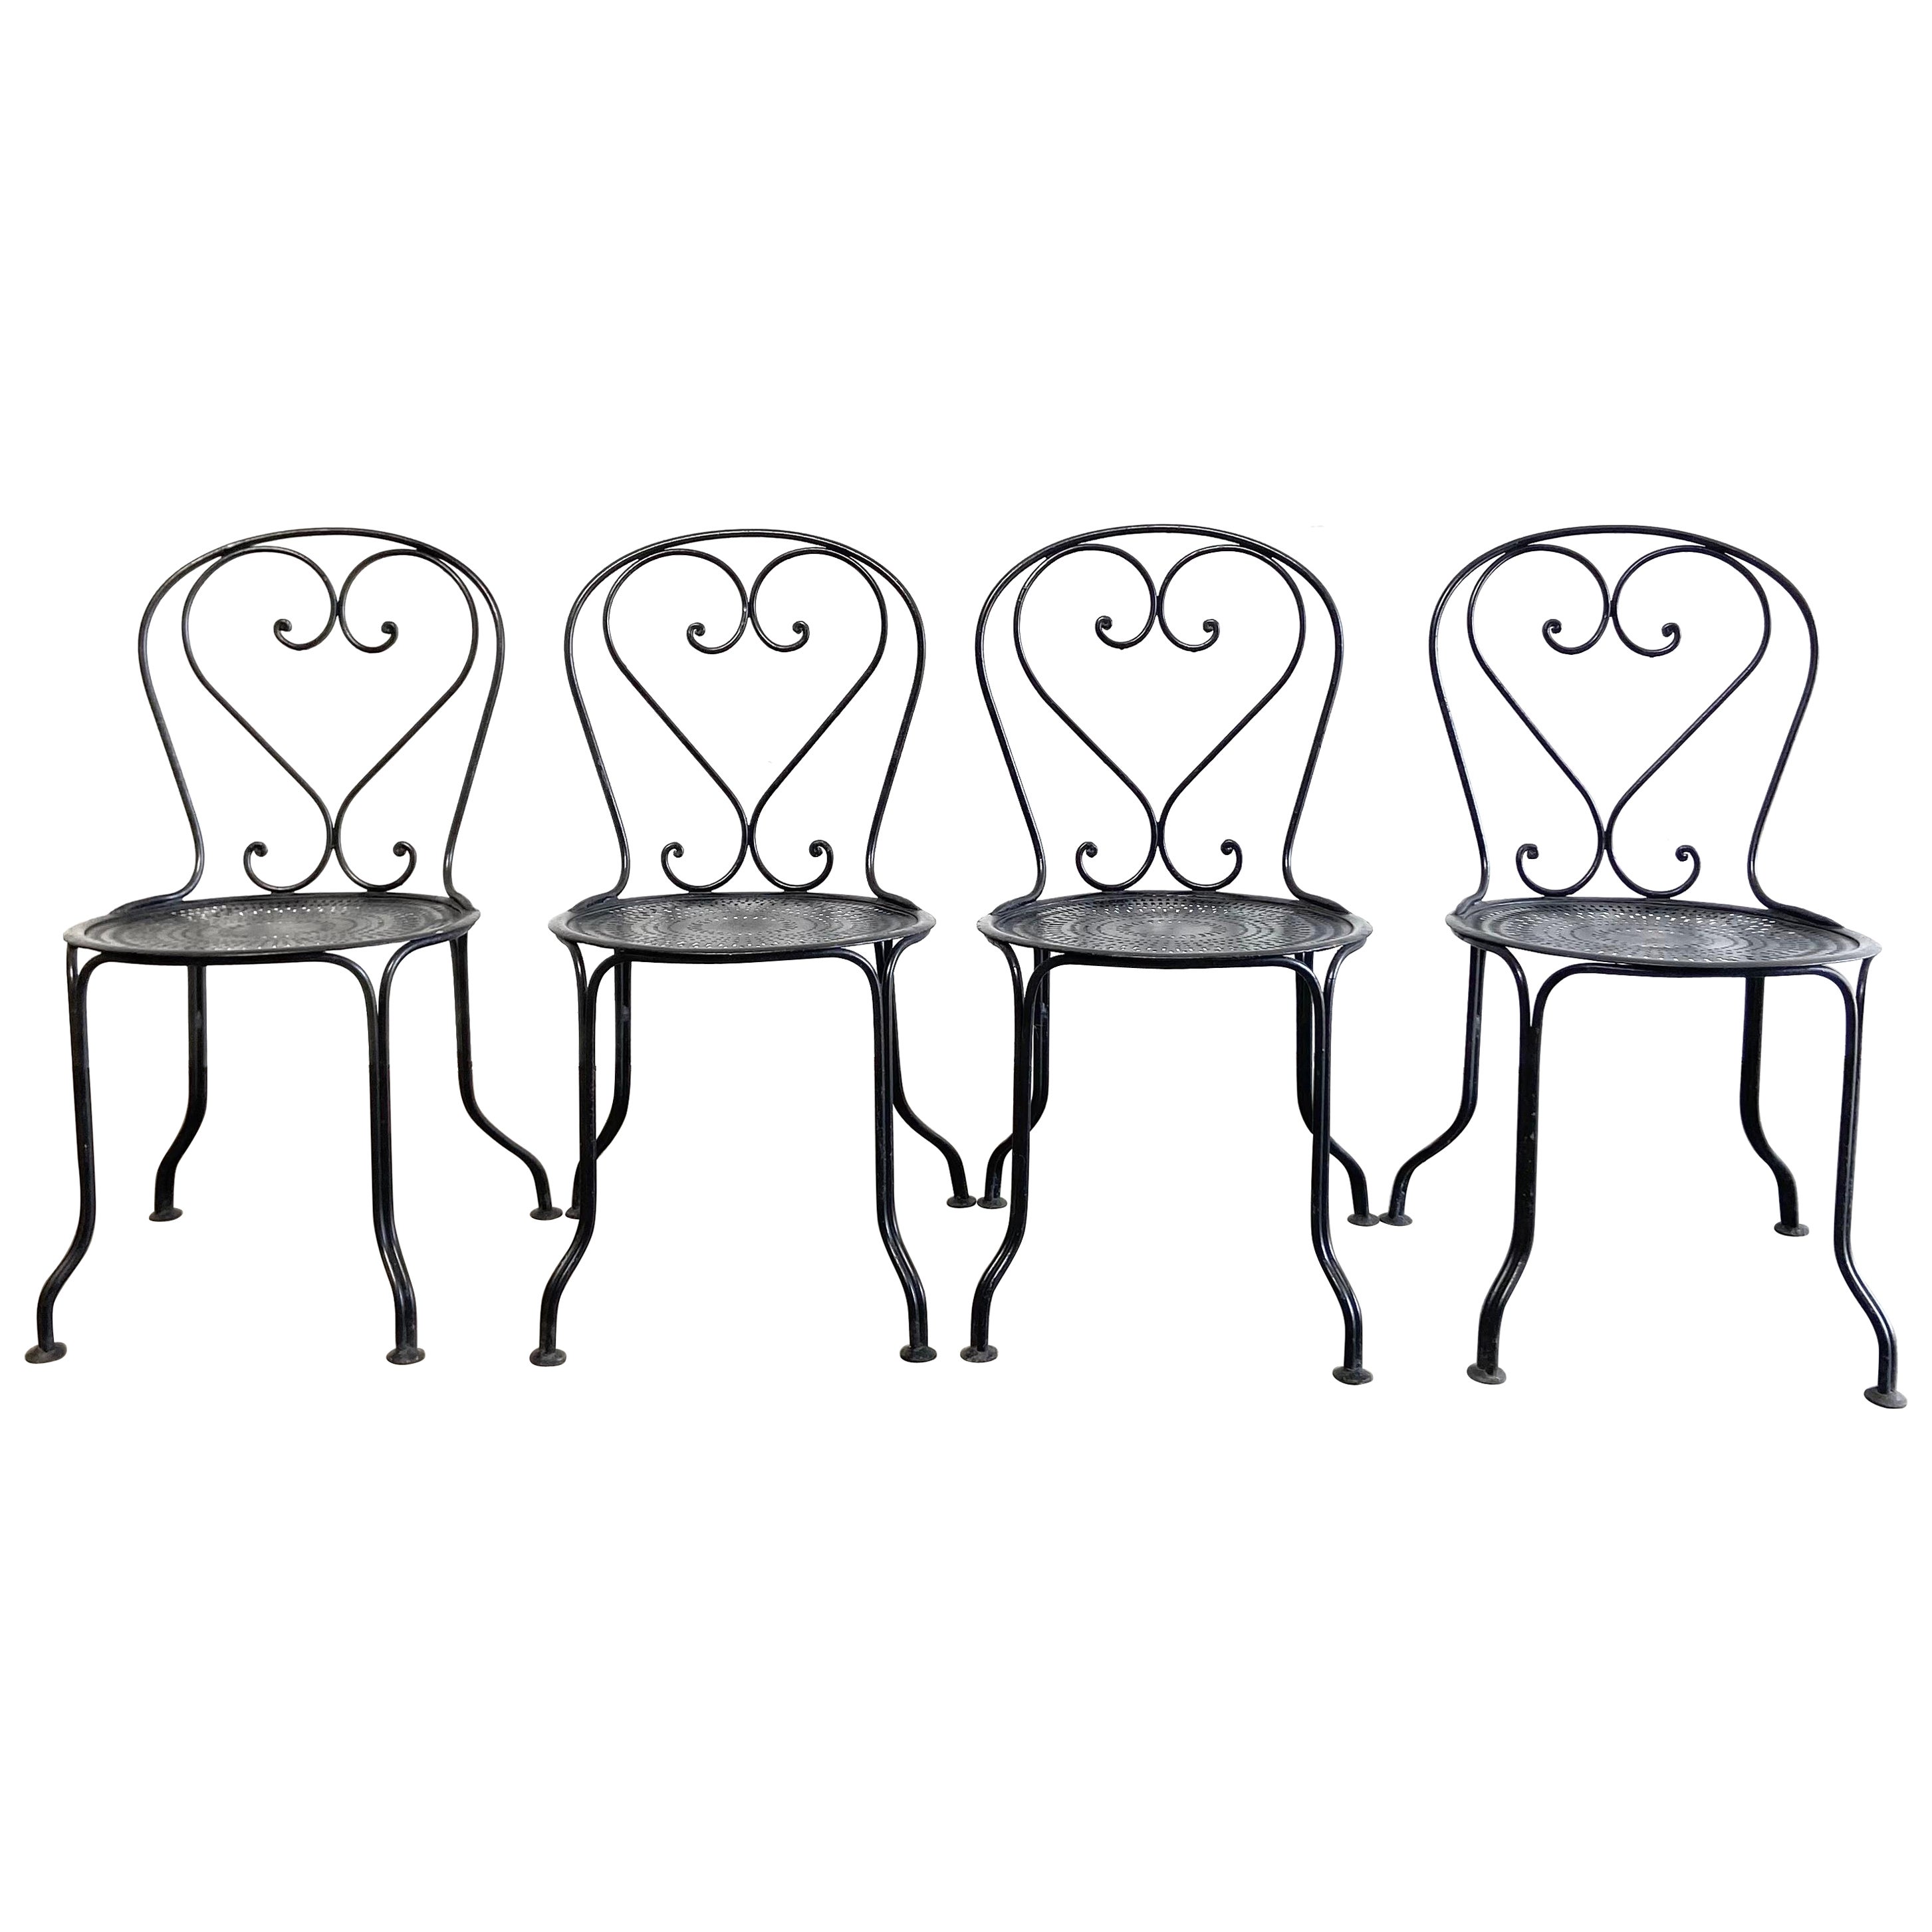 Set of 4 Black French Metal Outdoor Chairs